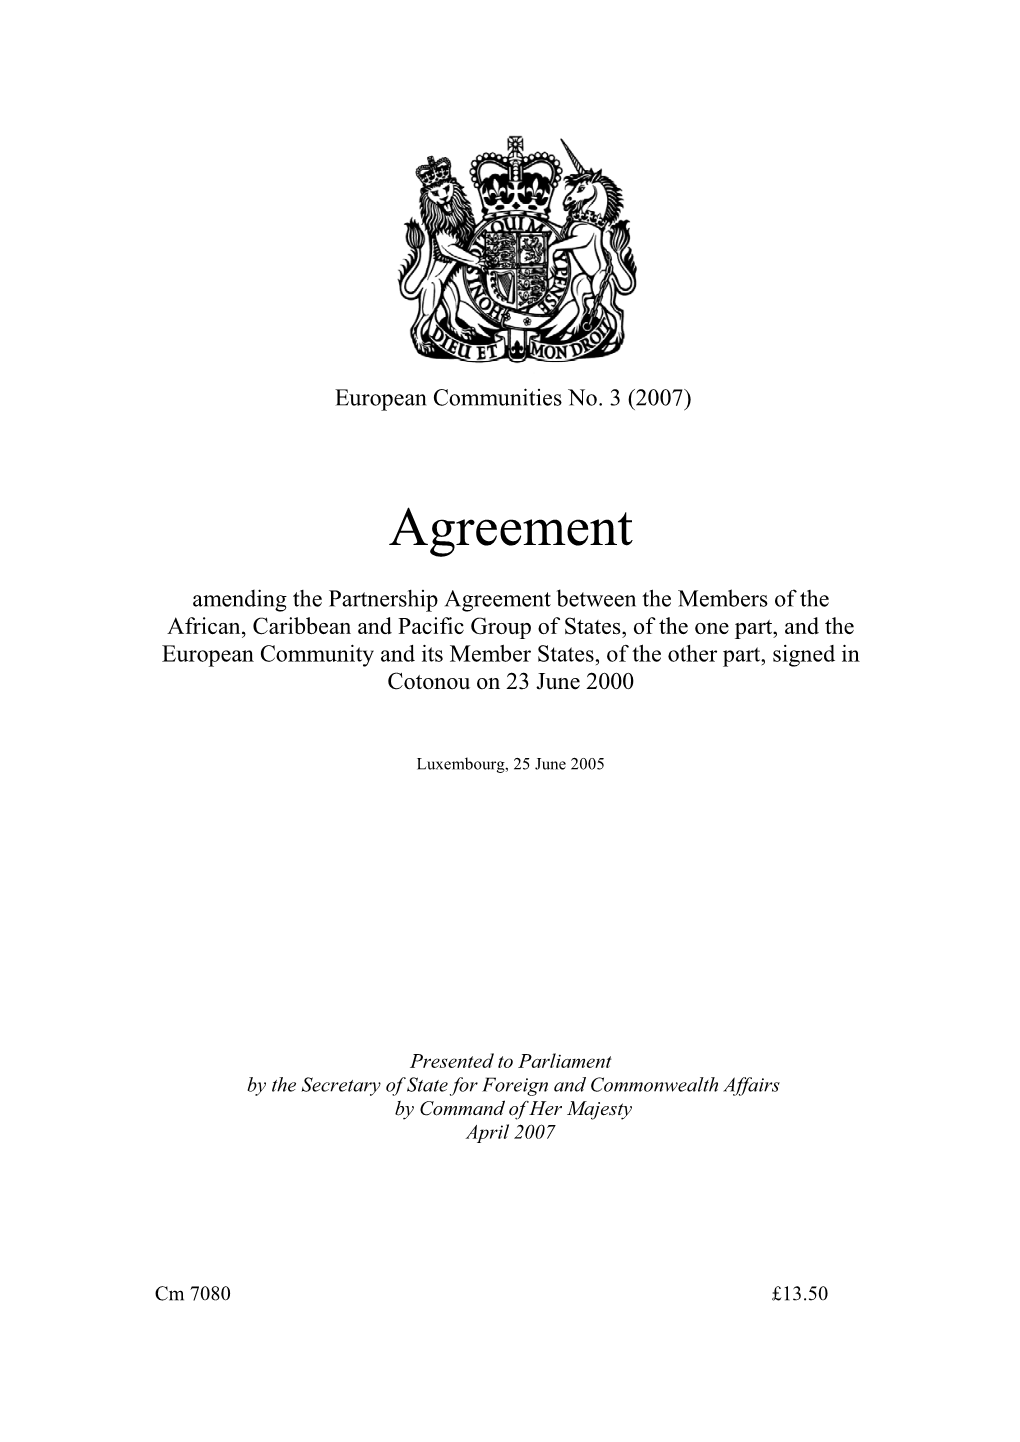 Agreement Amending the Partnership Agreement Between the Members